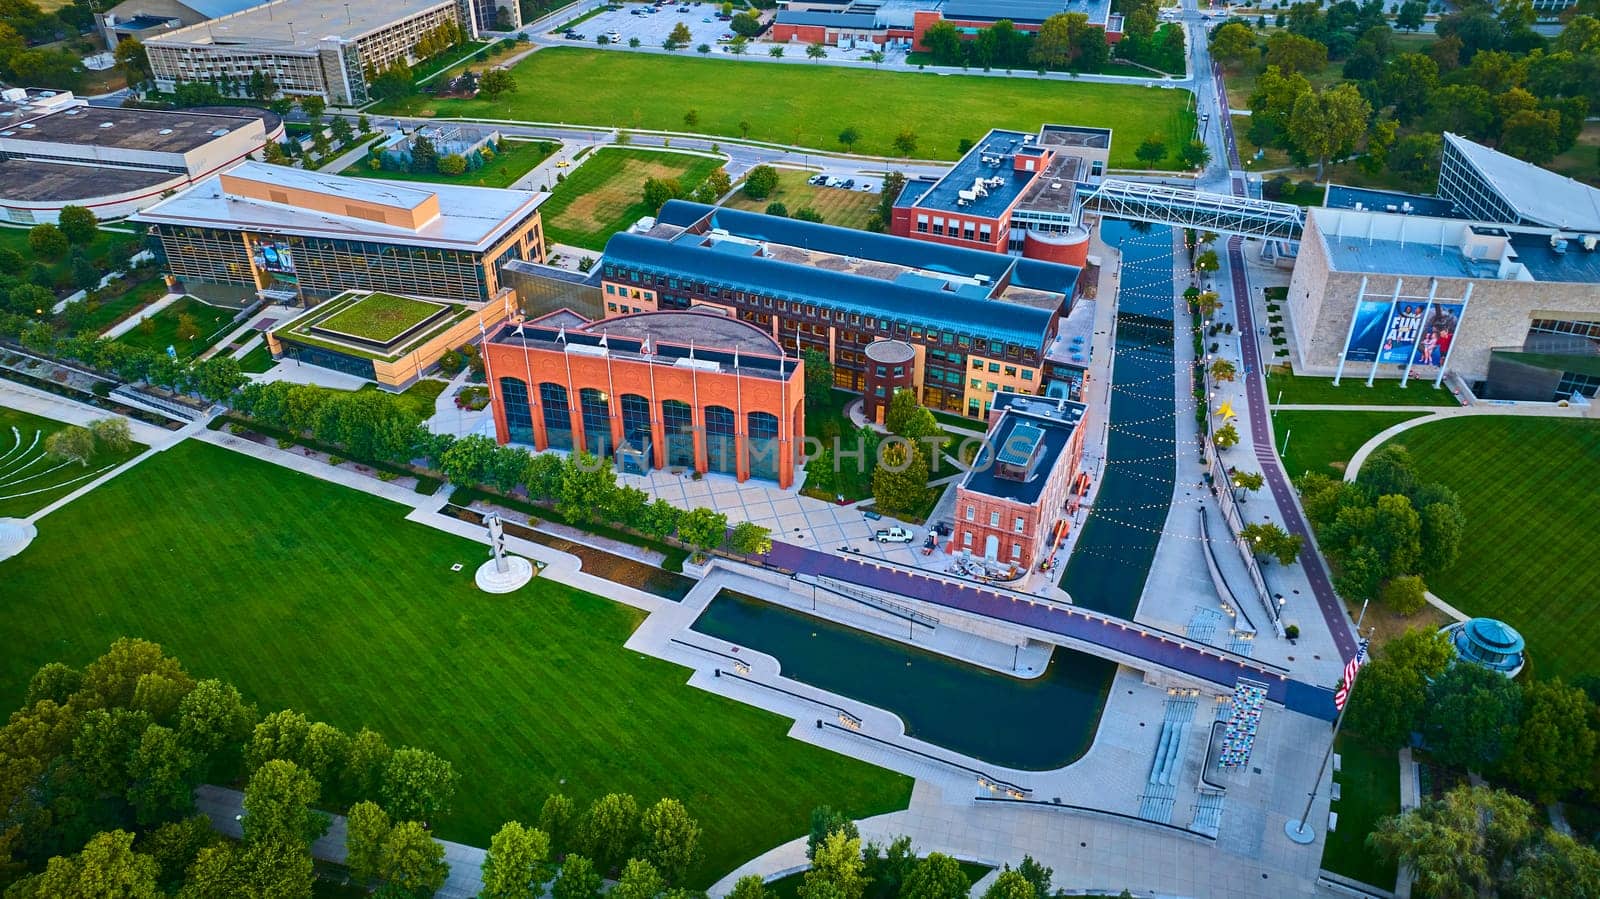 Aerial Golden Hour Glow on Urban Campus with Green Rooftop Garden, Indiana by njproductions